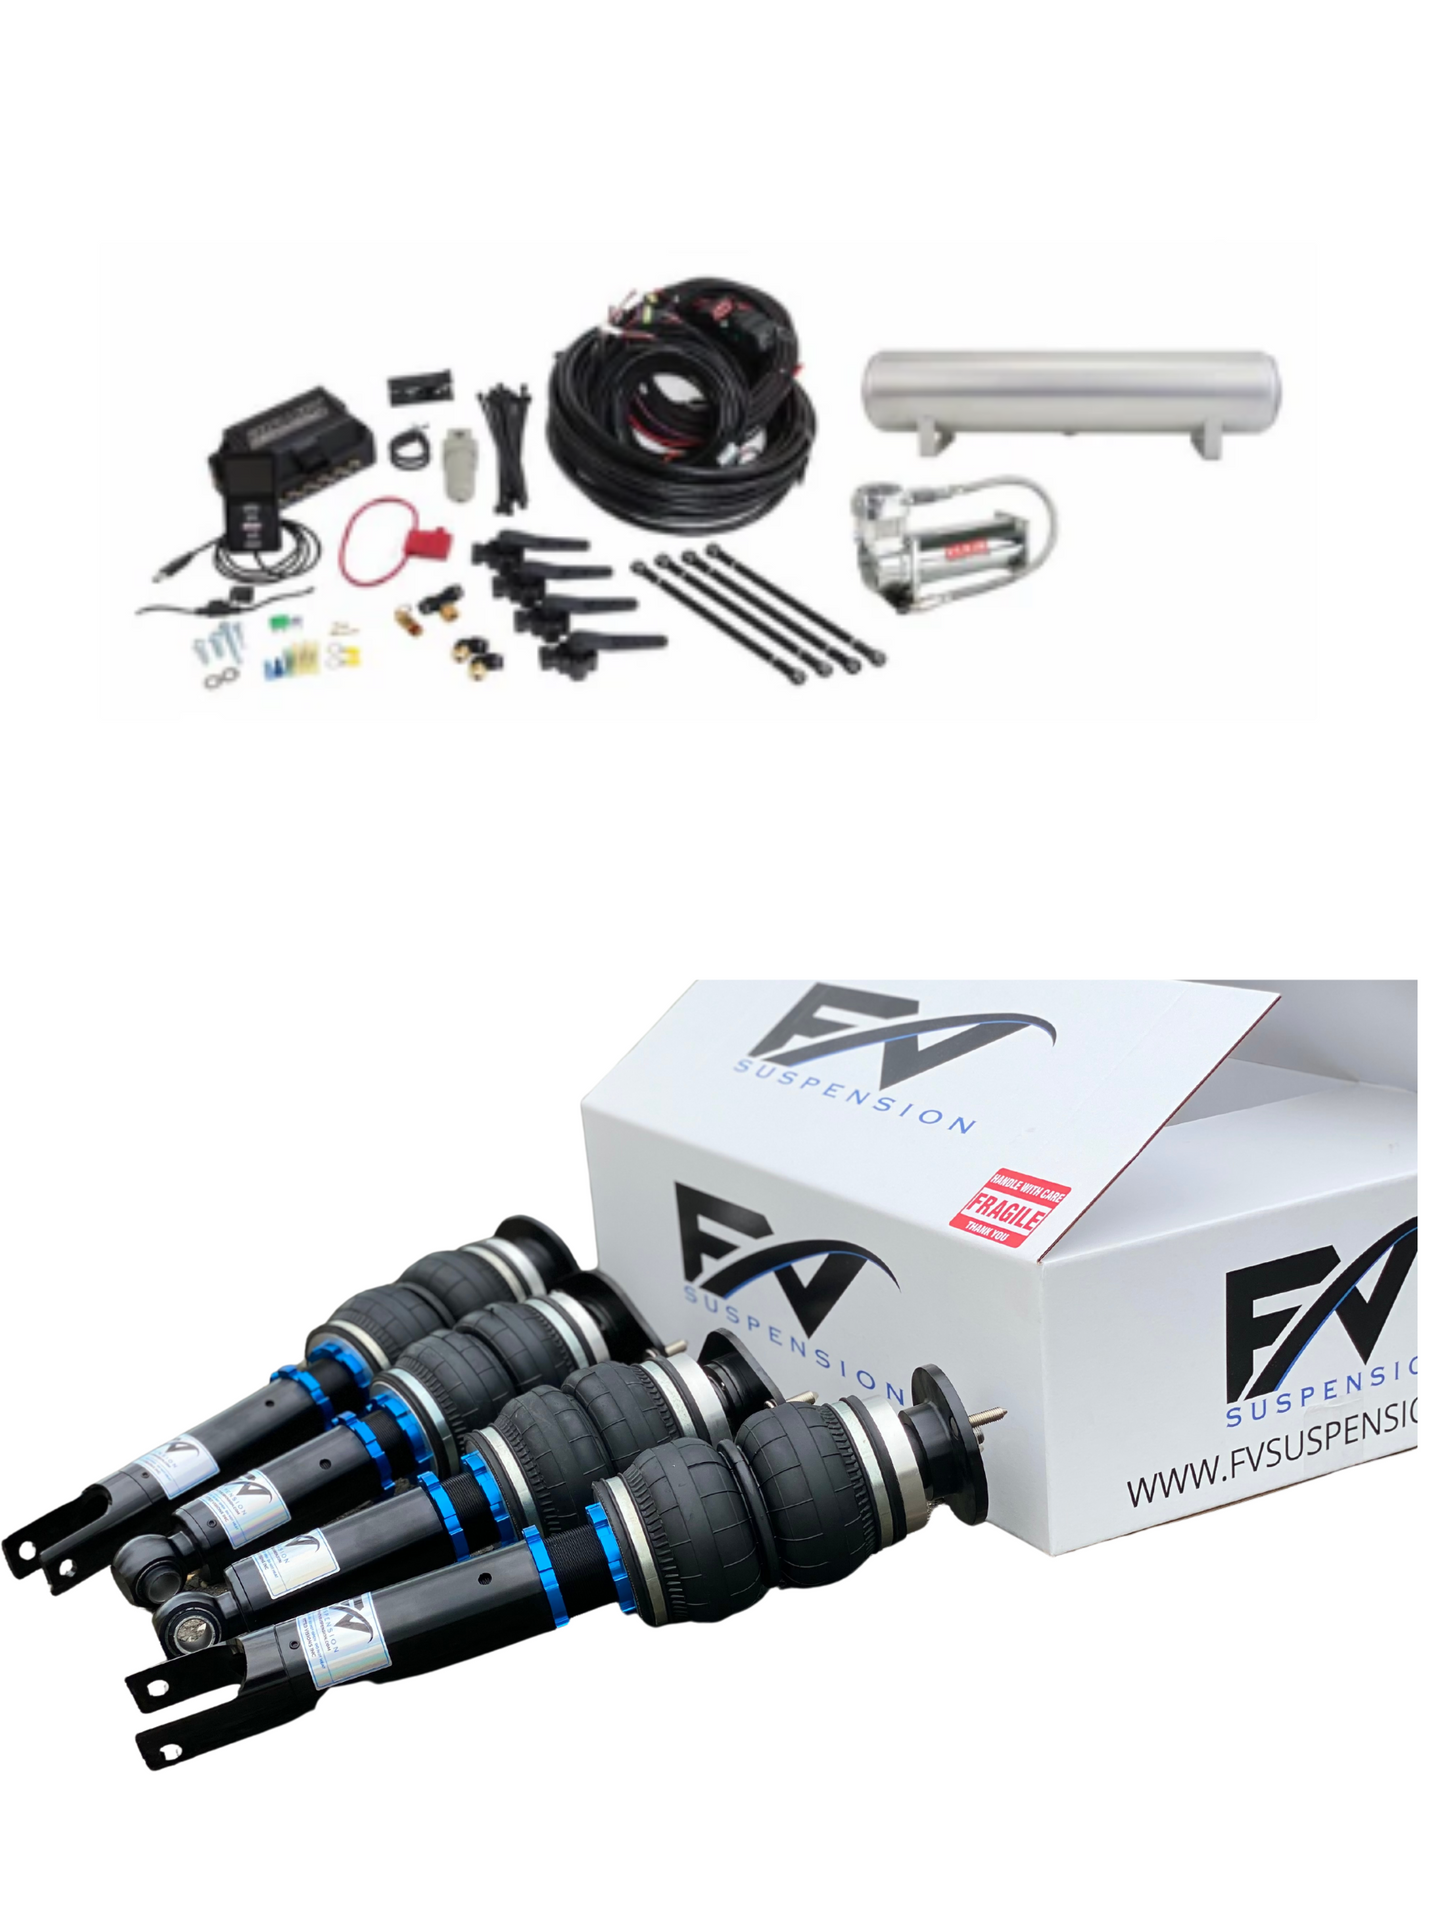 FV Suspension 3H Tier 3 Complete Air Ride kit for 18-22 Ford Mondeo 5 Wagon - FVALtier3kit209